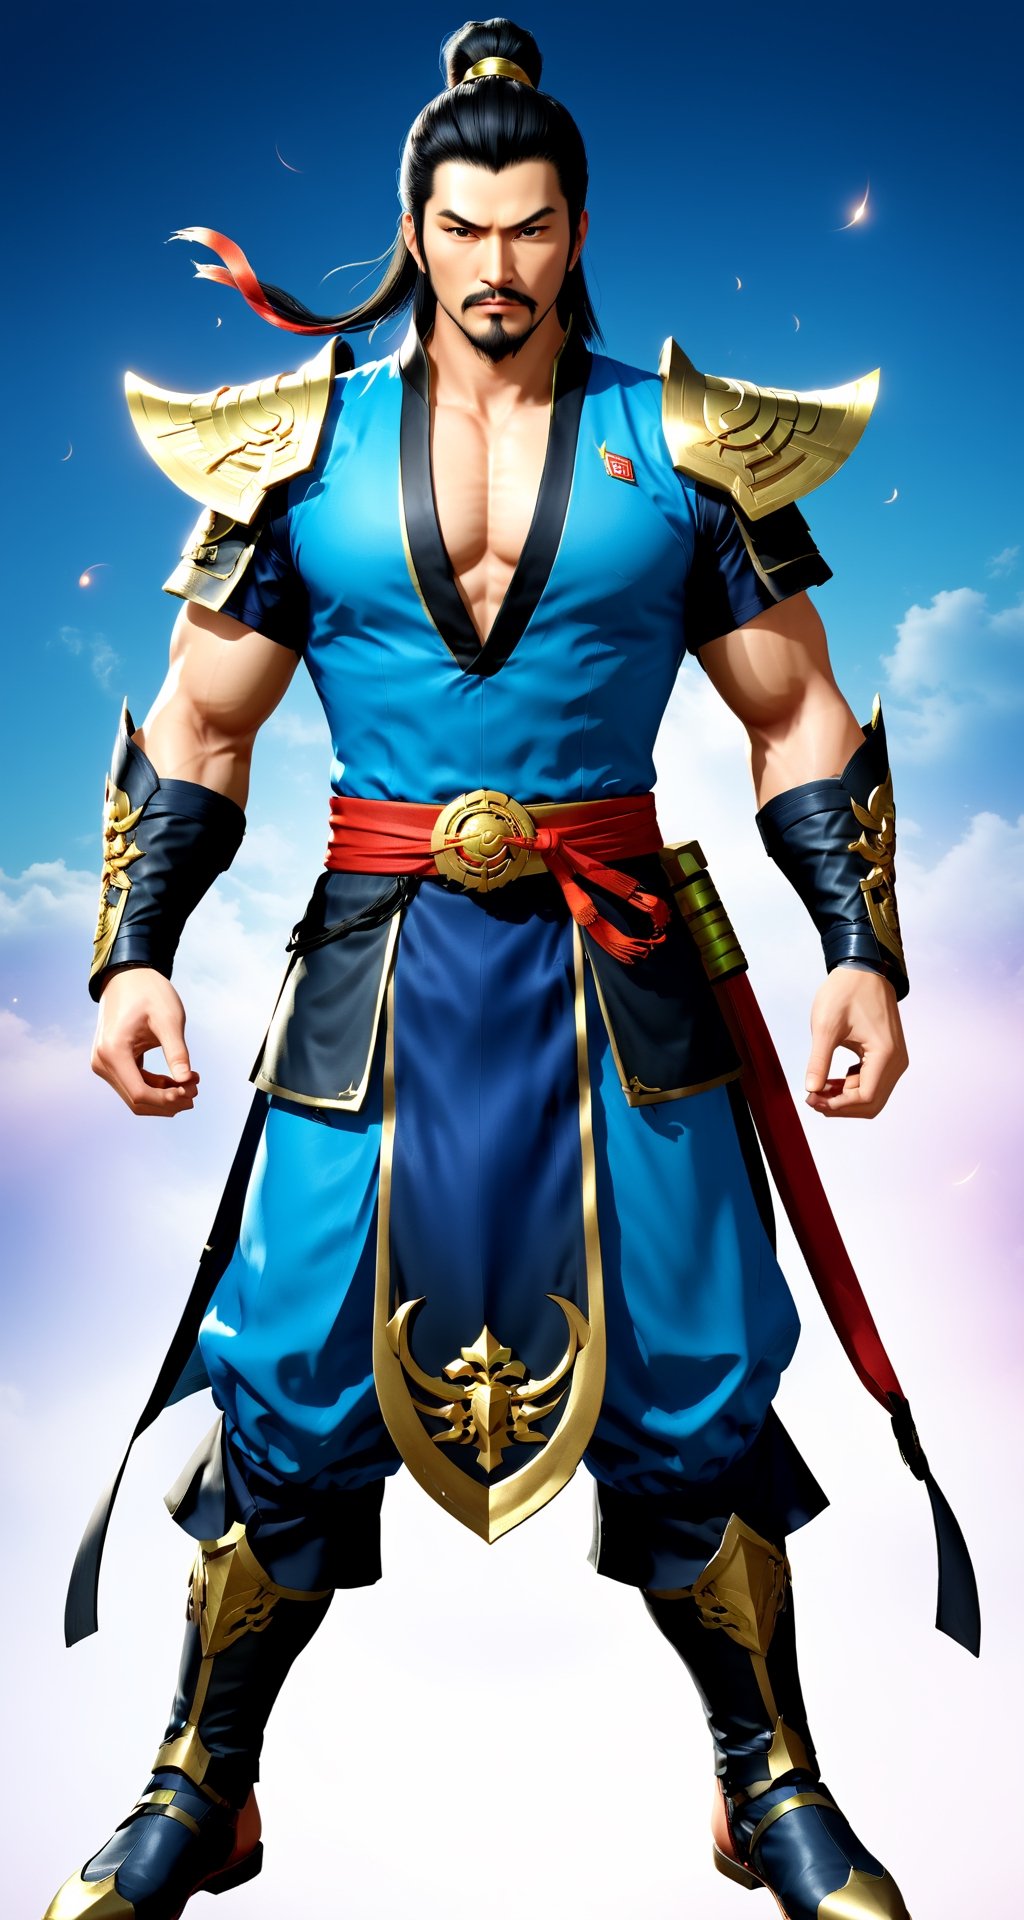 Create the character Yu Jin (Man) from the role-playing game Dynasty Warriors by the game company Koei Tecmo (full body)
BREAK
(long thin anchor beard), (thin mustache), (calm look:1.5), (black hair:1.5), (short hair:1.5),
(Blue Suit:1.5), 
BREAK
(Ancient china background: 1.5), (full_background) ,(cleavage large:1.5), (standing pose: 1.5), (dinamic pose:1.5), (night sky:1.5), 
BREAK
(beautiful_hands: 1.5), (beautiful_feets: 1.5), (pretty fingers:1.5)
BREAK
(Realistic, Photorealistic: 1.5), (Masterpiece, Best Quality: 1.4), (Ultra High Resolution: 1.5), (RAW Photo: 1.2), (Face Focus: 1.2), (Ultra Detailed CG Unified 8k Wallpaper: 1.5), (Hyper Sharp Focus: 1.5), (Ultra Sharp Focus: 1.5), (Beautiful pretty face: 1.5) (professional photo lighting:1.3), , (super detailed background, detail background: 1.5), (elegant:1.3), (kinematic:1.4),better_hands,Movie Still